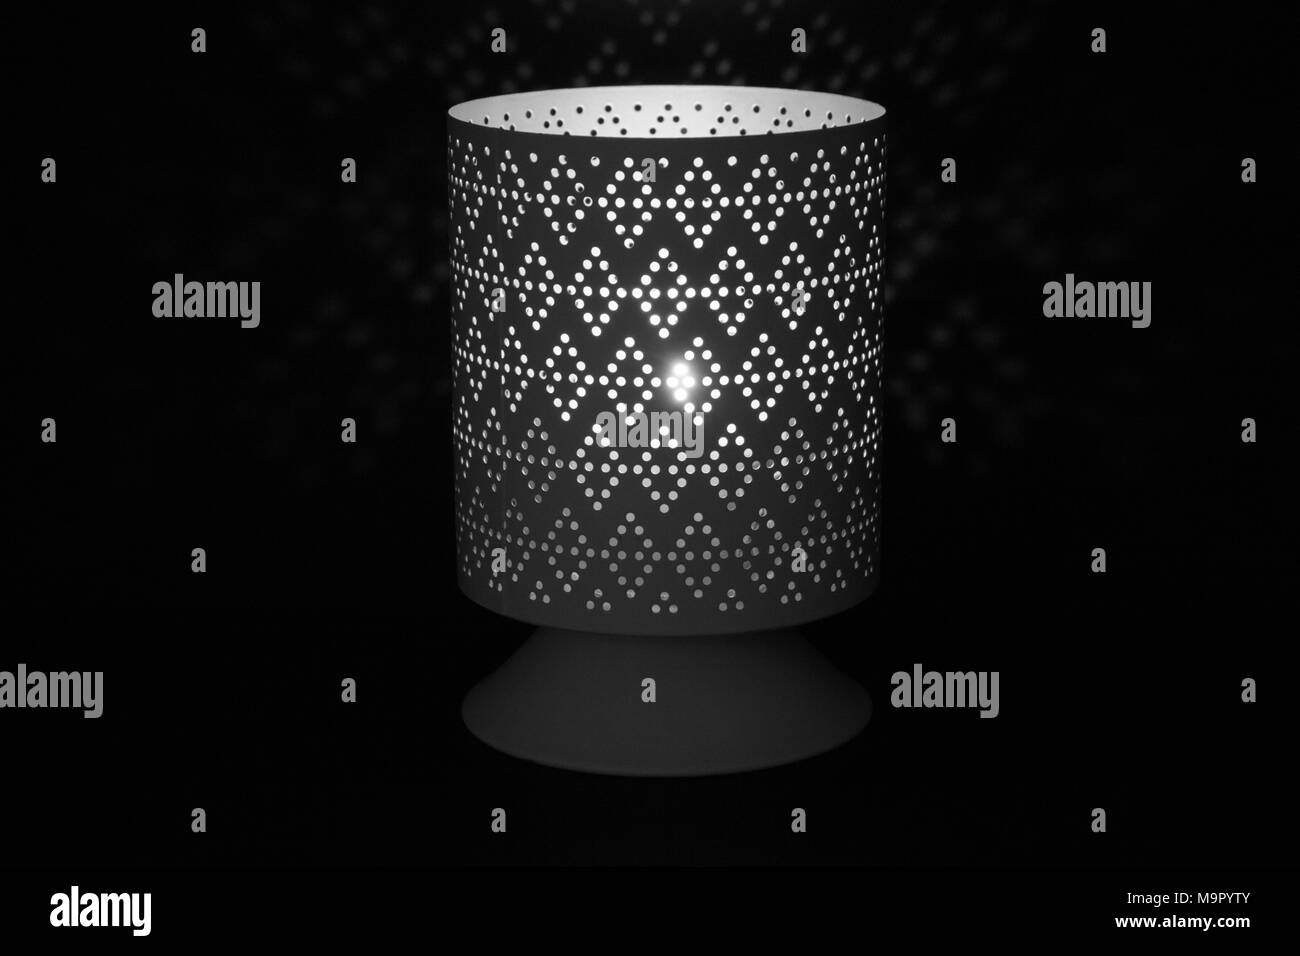 Lamp with Dark Background and Lace Design Stock Photo